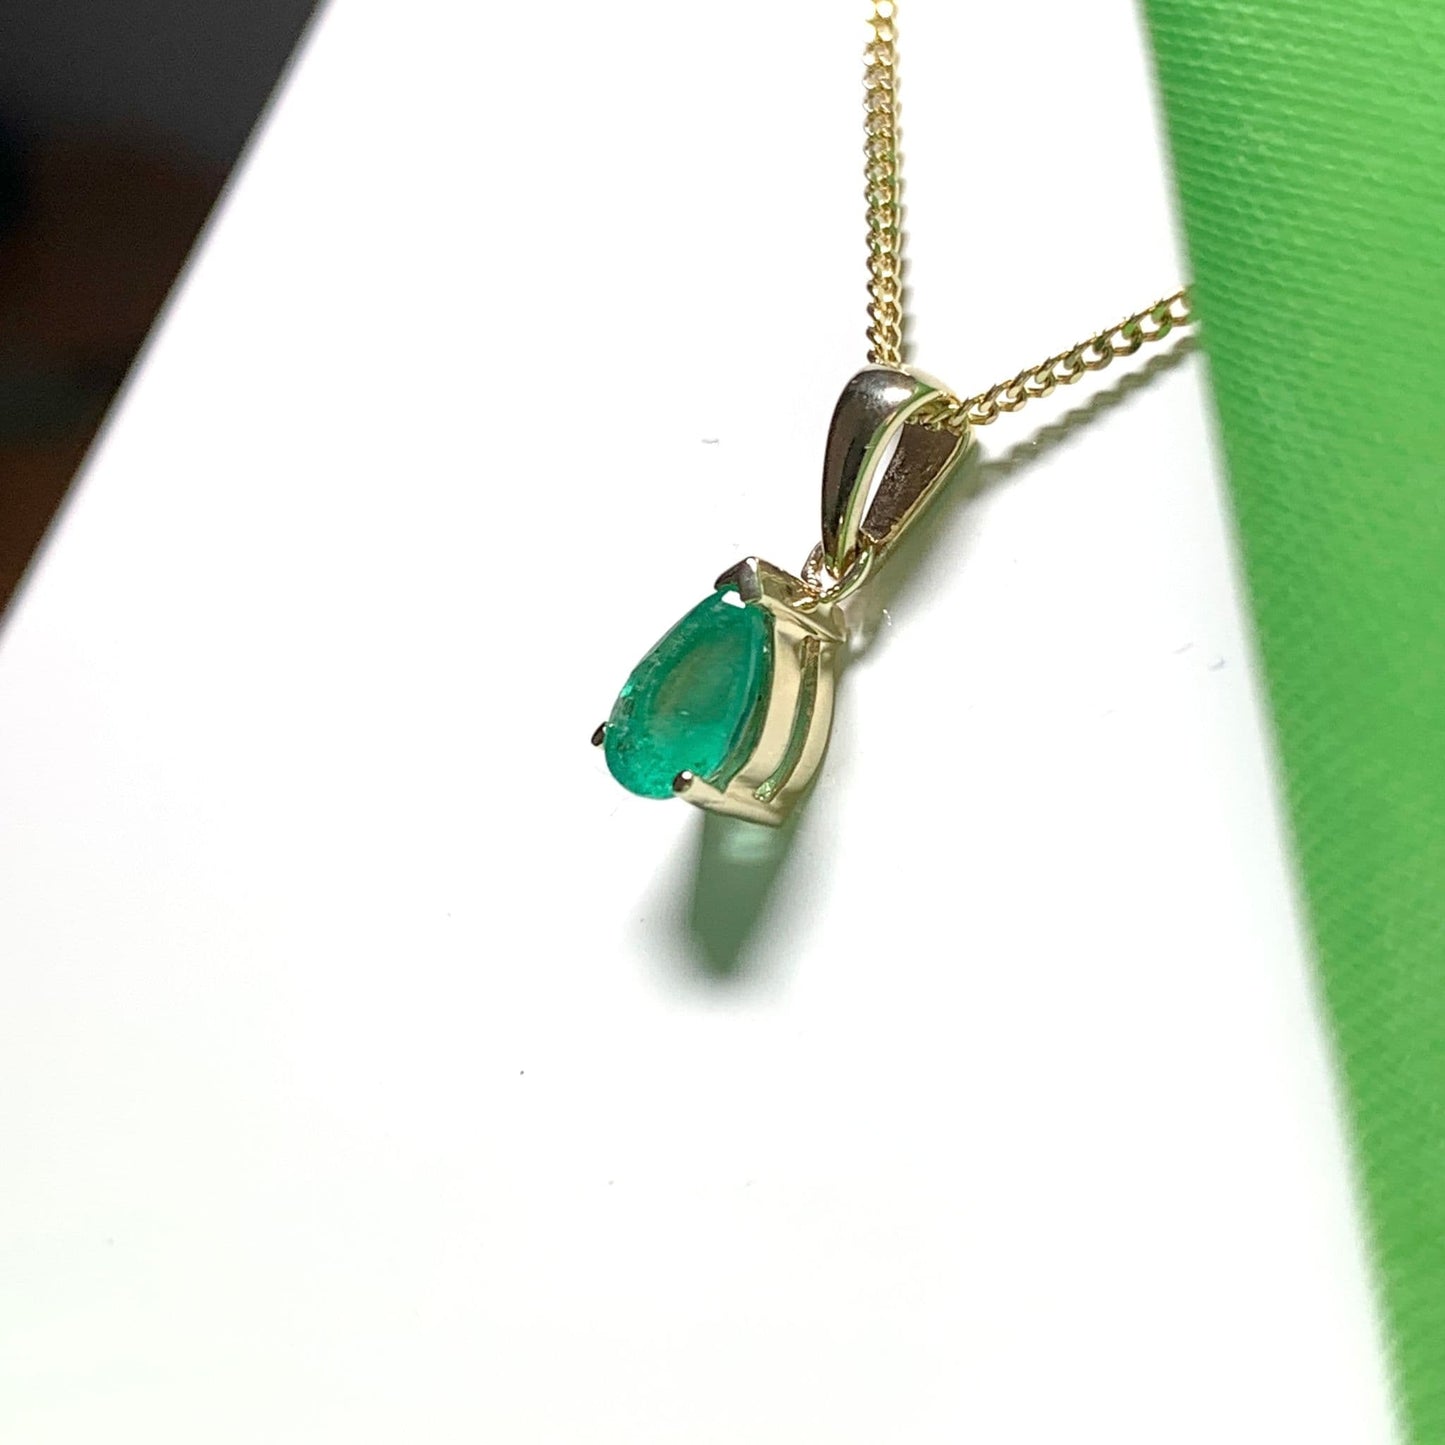 Real green emerald necklace teardrop gold pendant